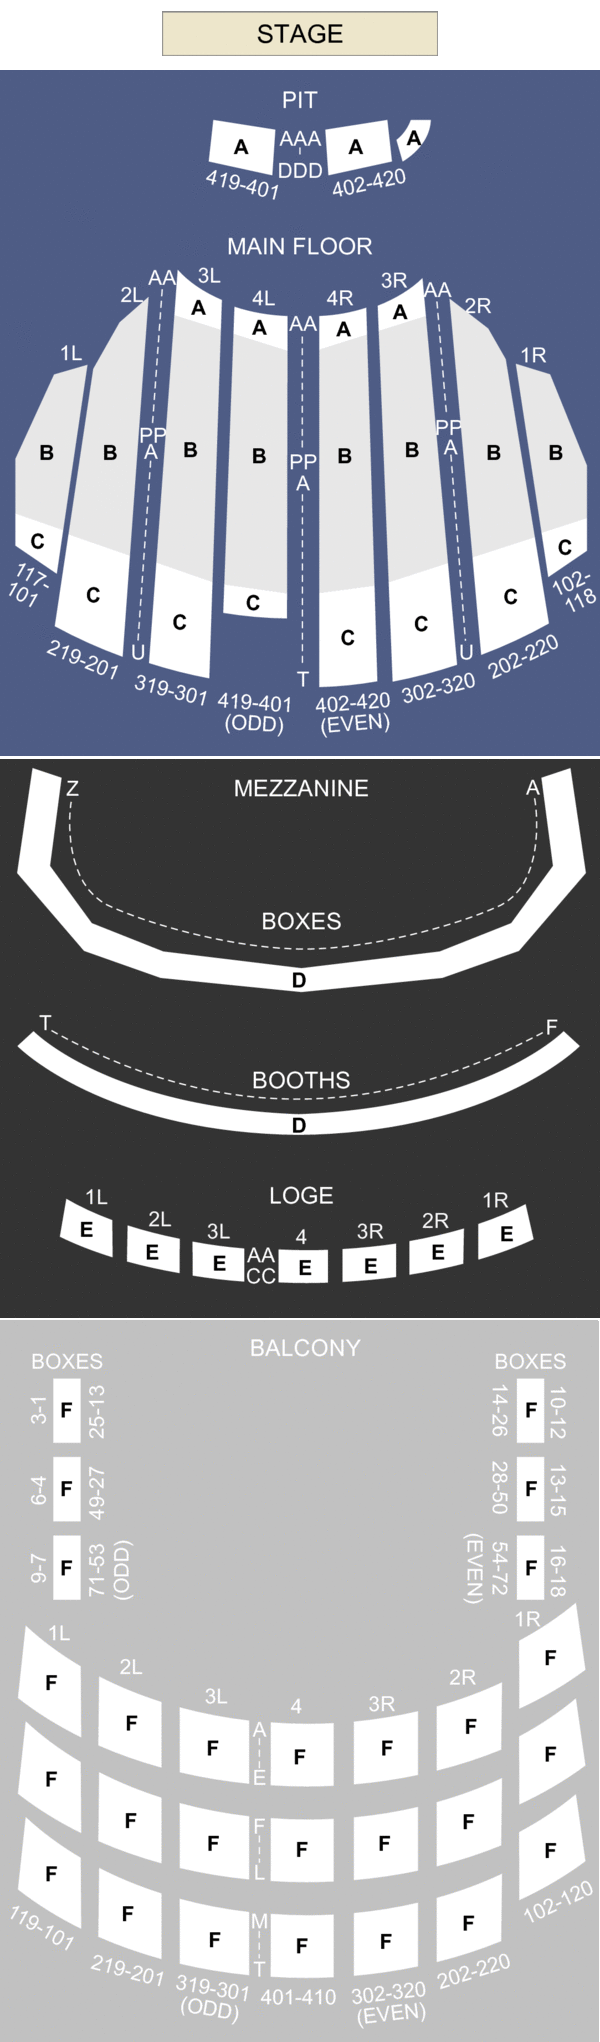 The Chicago Theatre, Chicago, IL - Seating Chart & Stage ...